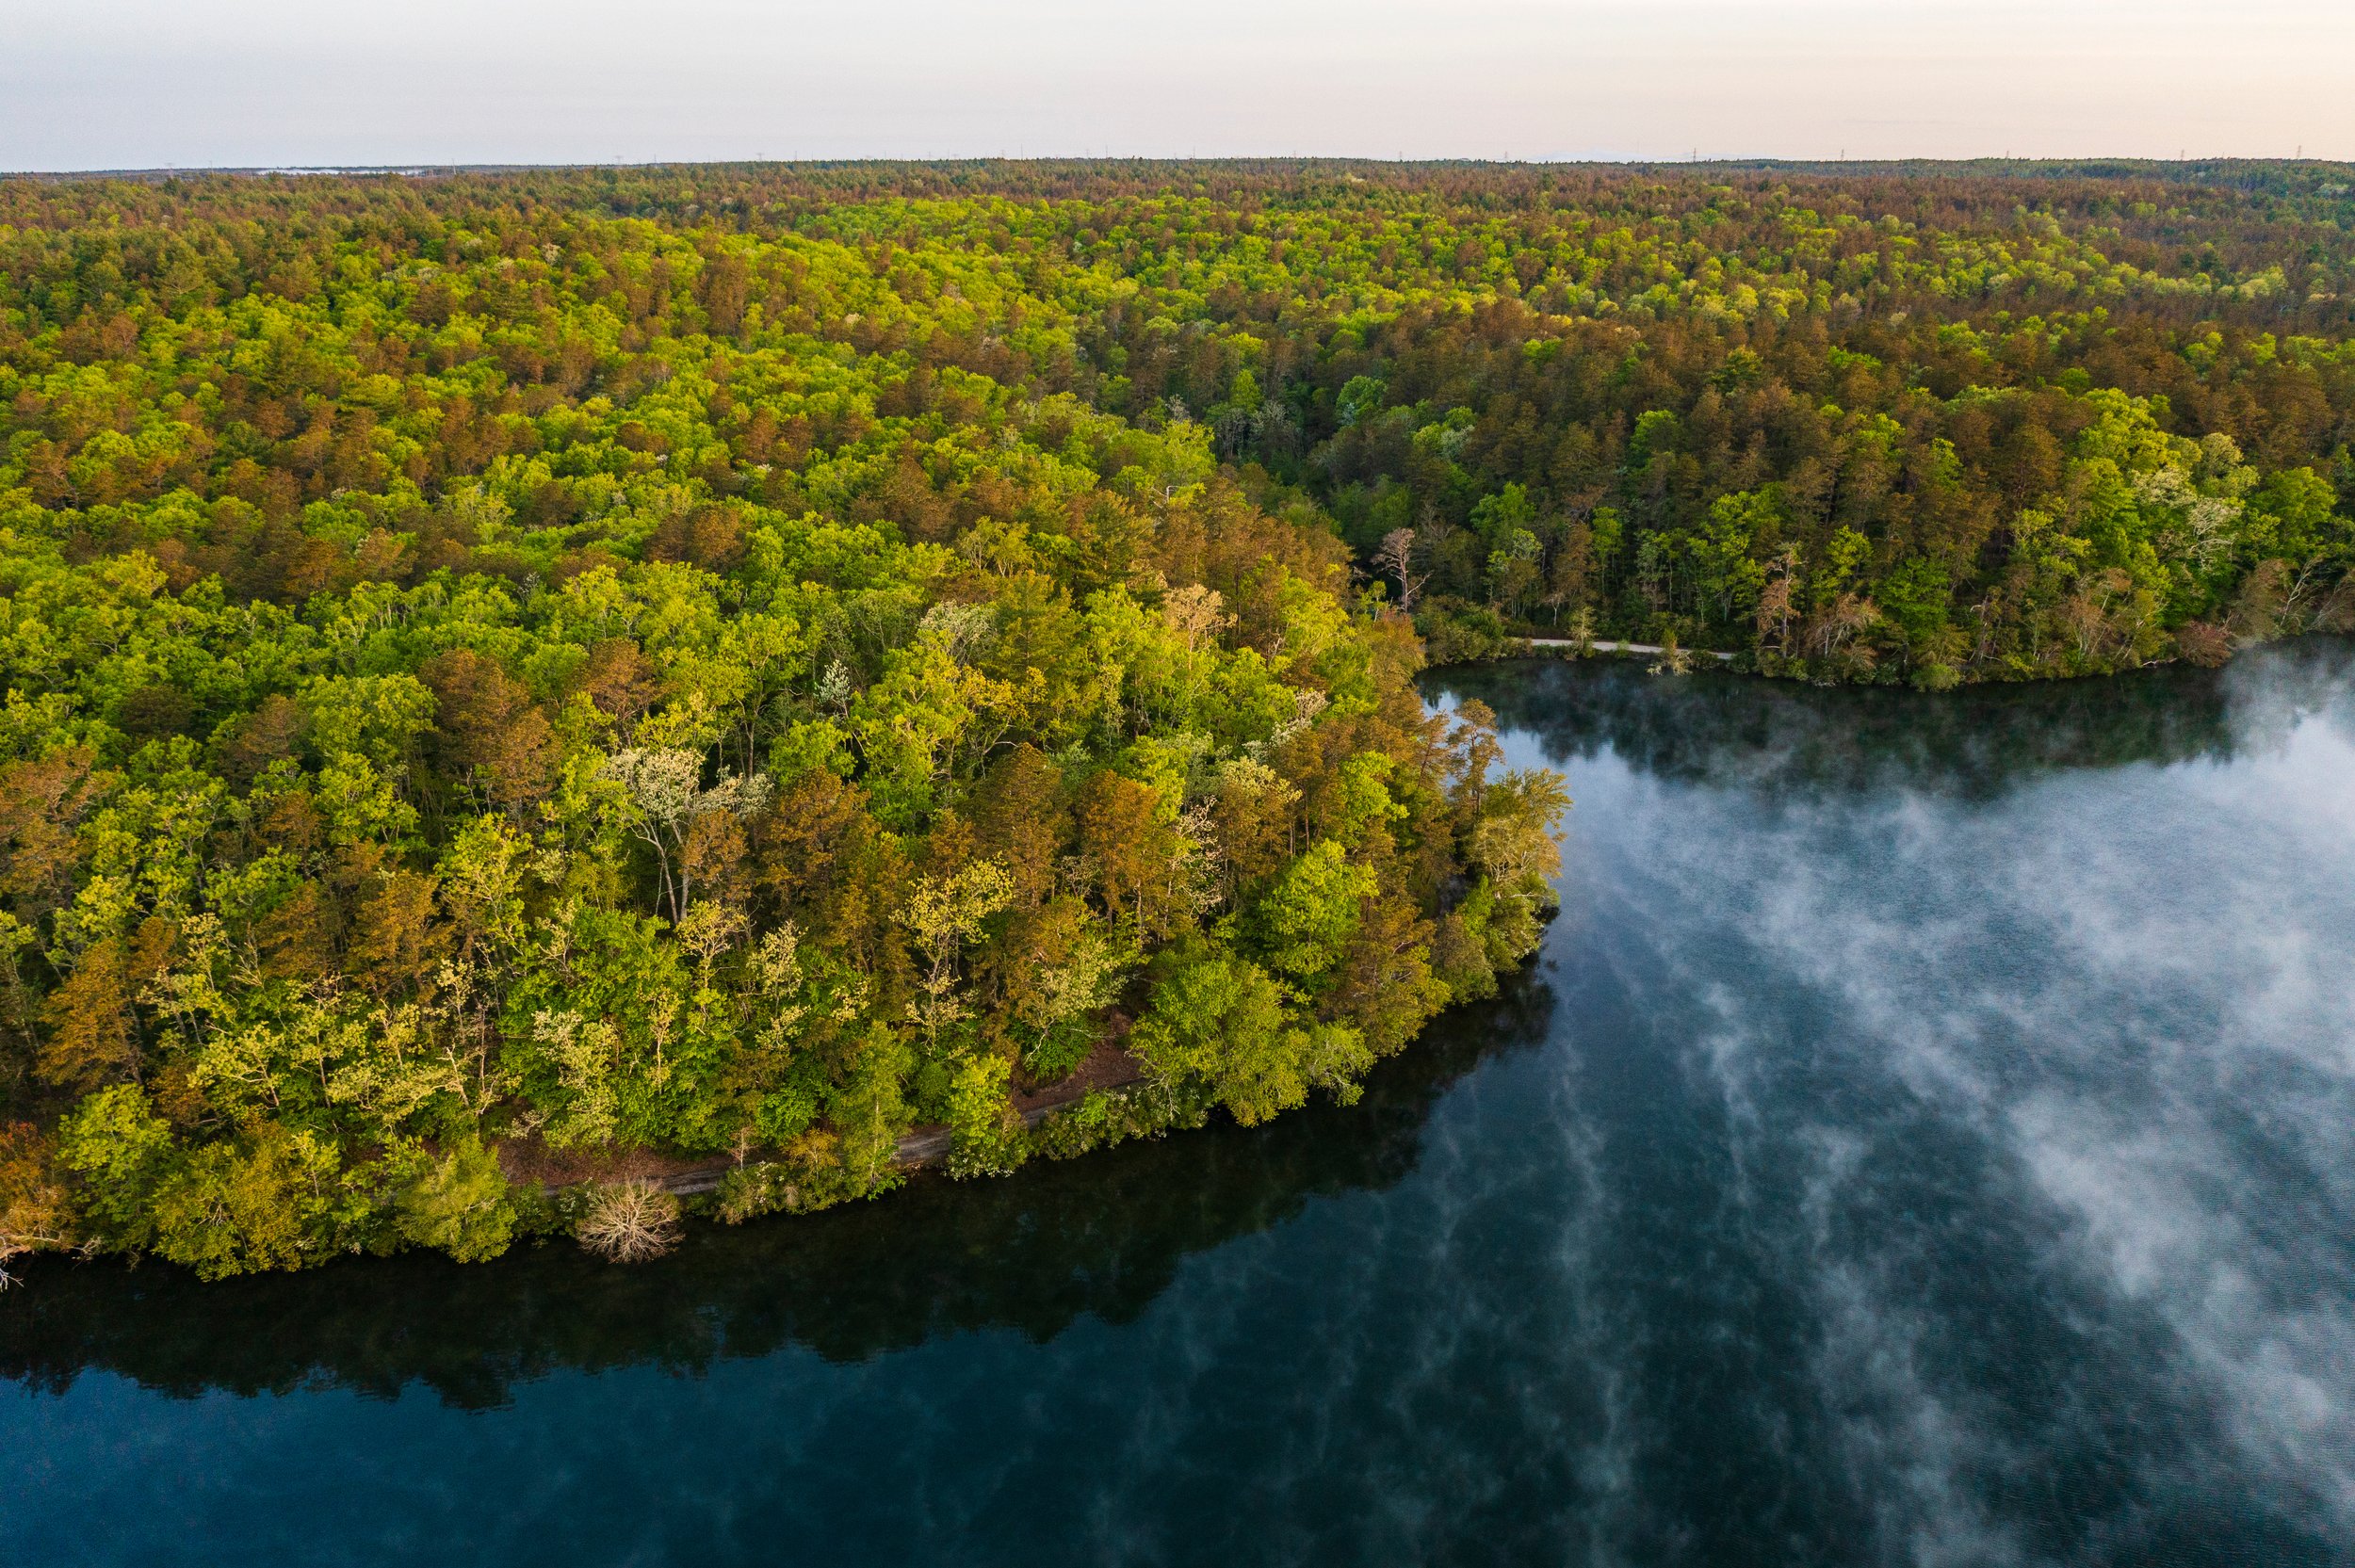  A drone's view of the forest at the Halfway Pond Conservation Area in Plymouth, Massachusetts. Spring. 